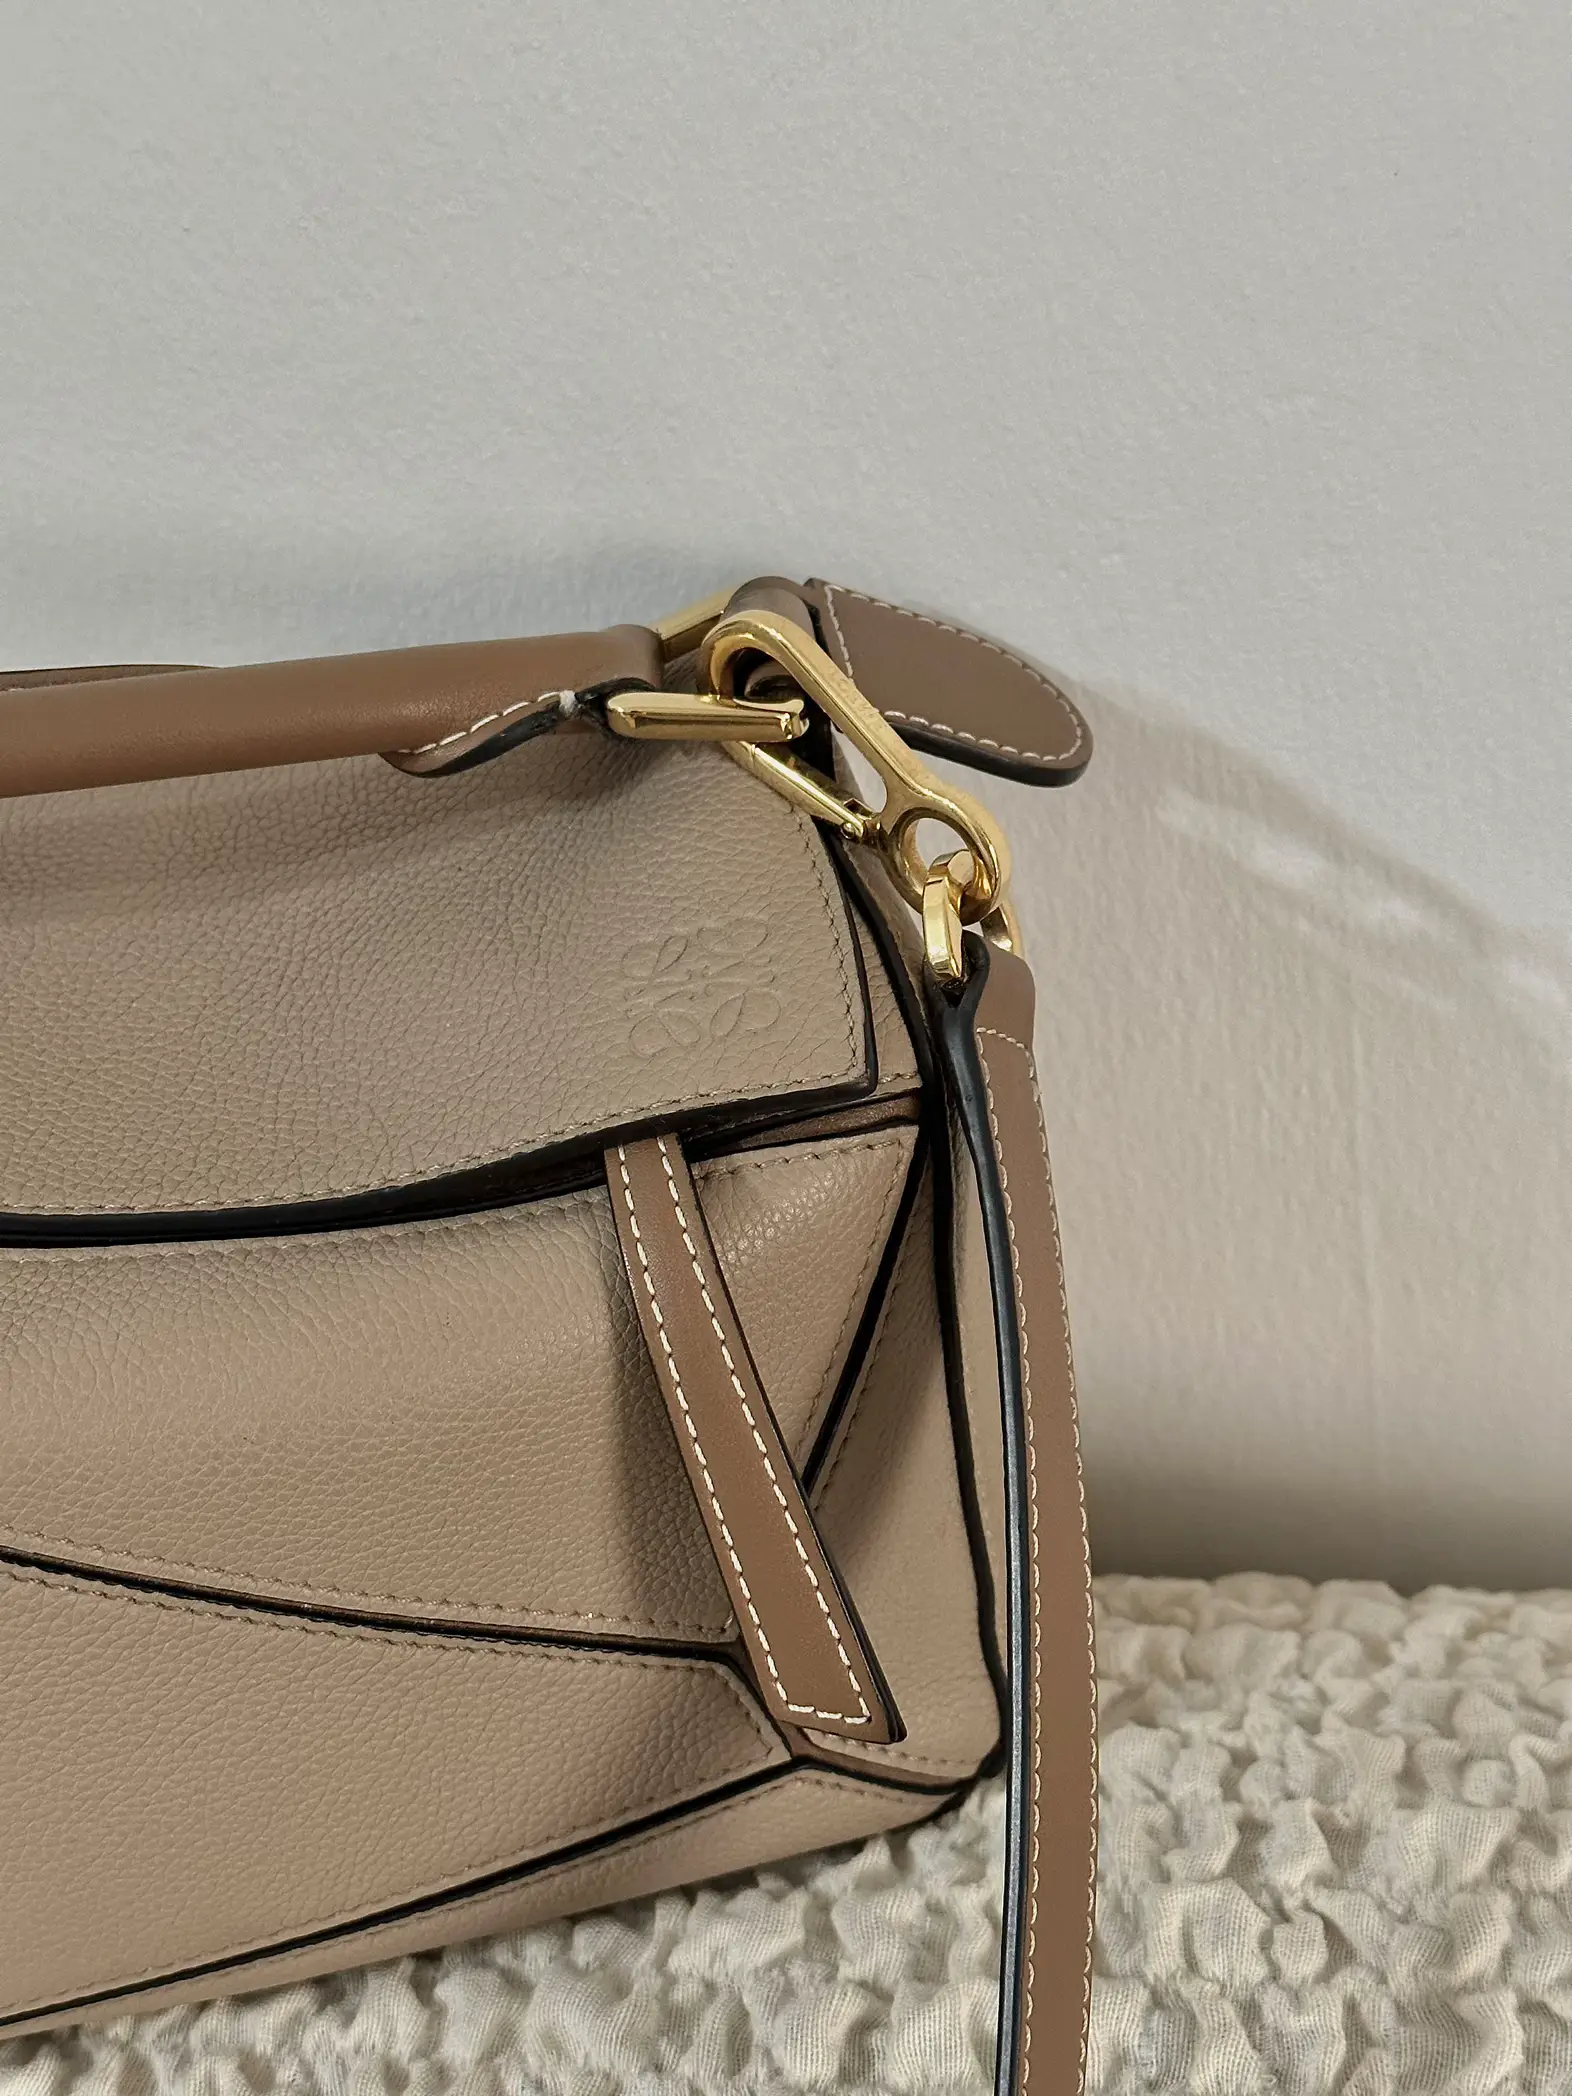 Unboxing and Review: YSL small Envelope and LV Neverfull (more